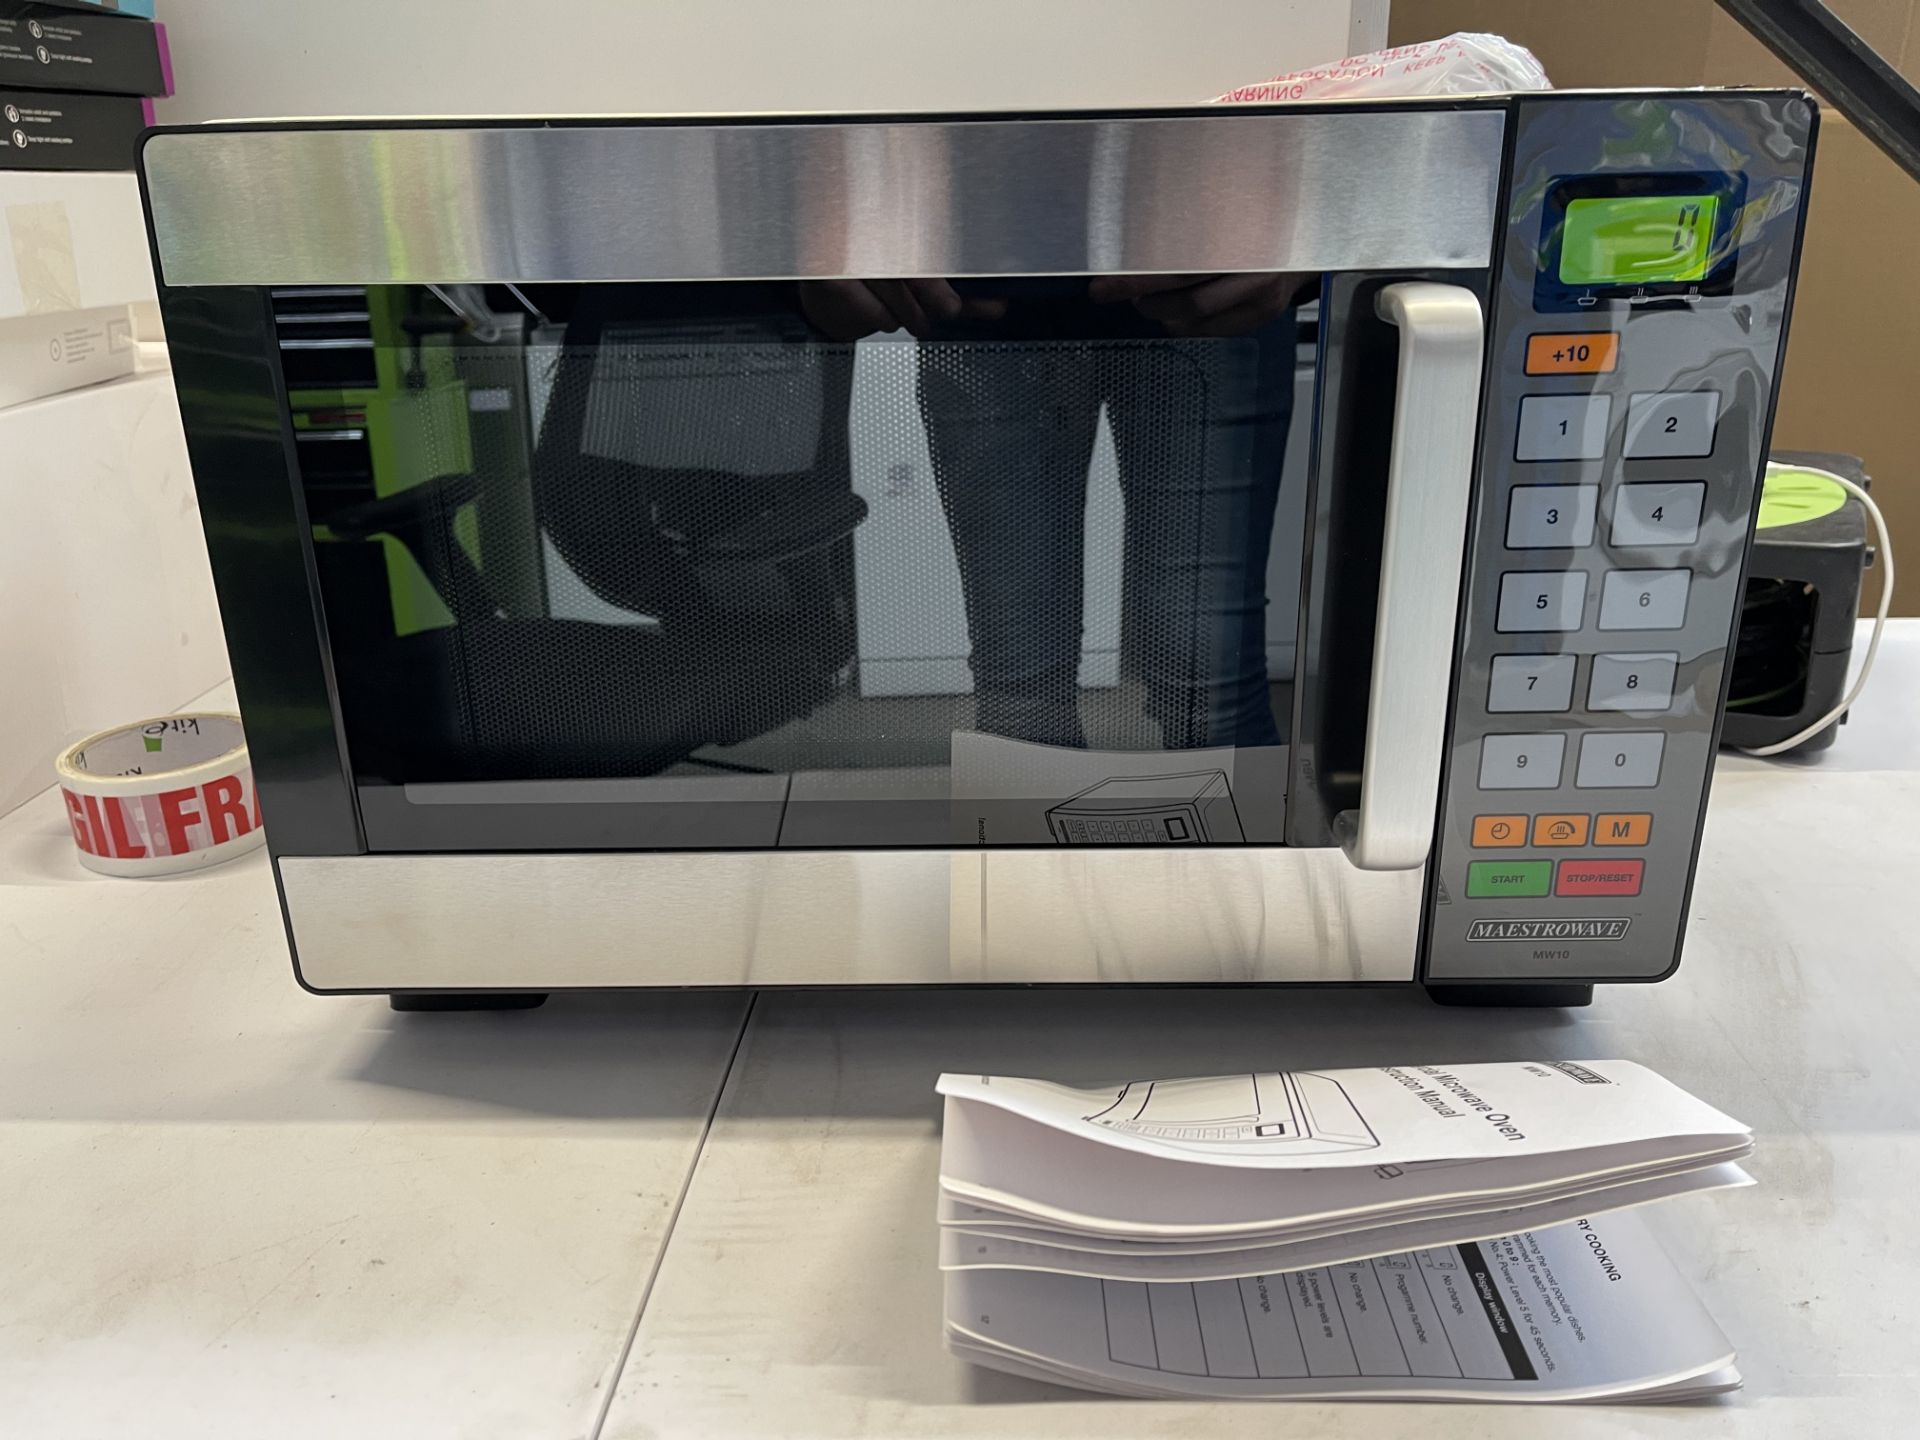 BOXED MAESTROWAVE STAINLESS STEEL COMMERCIAL MICROWAVE, MODEL- MW10, RRP-£200.00Condition Report - Image 2 of 2